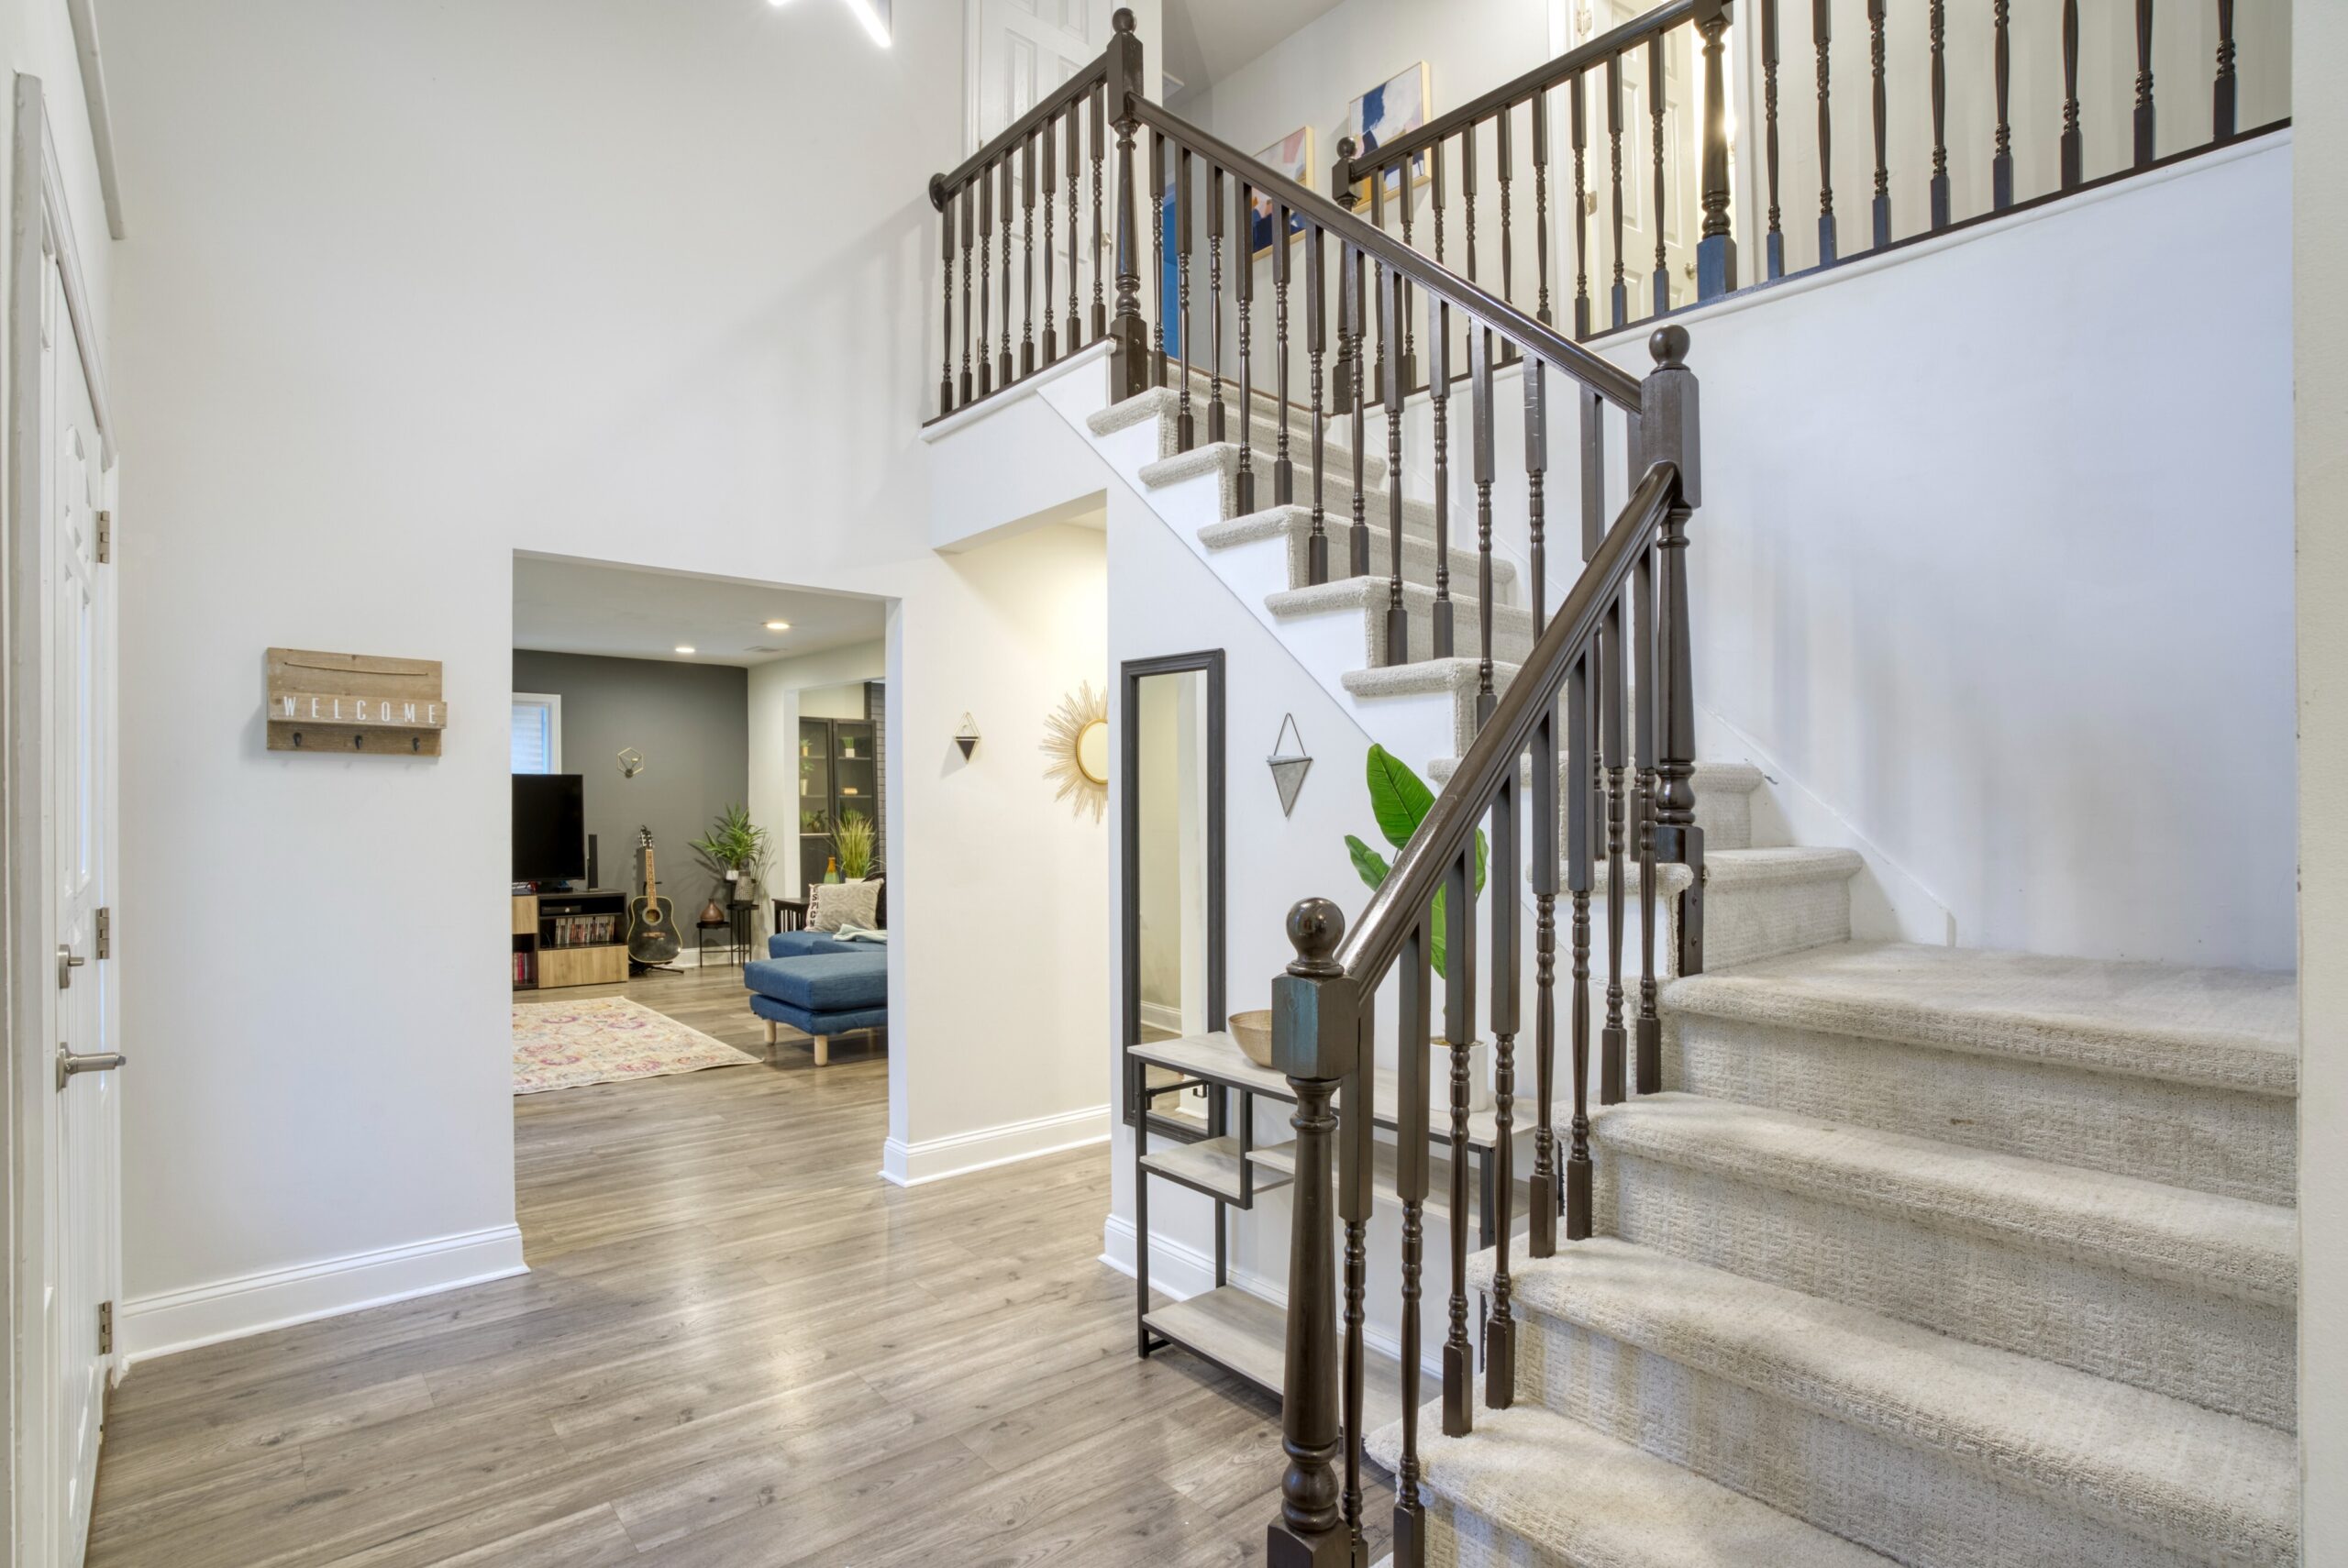 Interior professional photo of 9015 Longbow Rd - showing the entryway with carpeted staircase to second floor, glimpse of living room through the open doorway